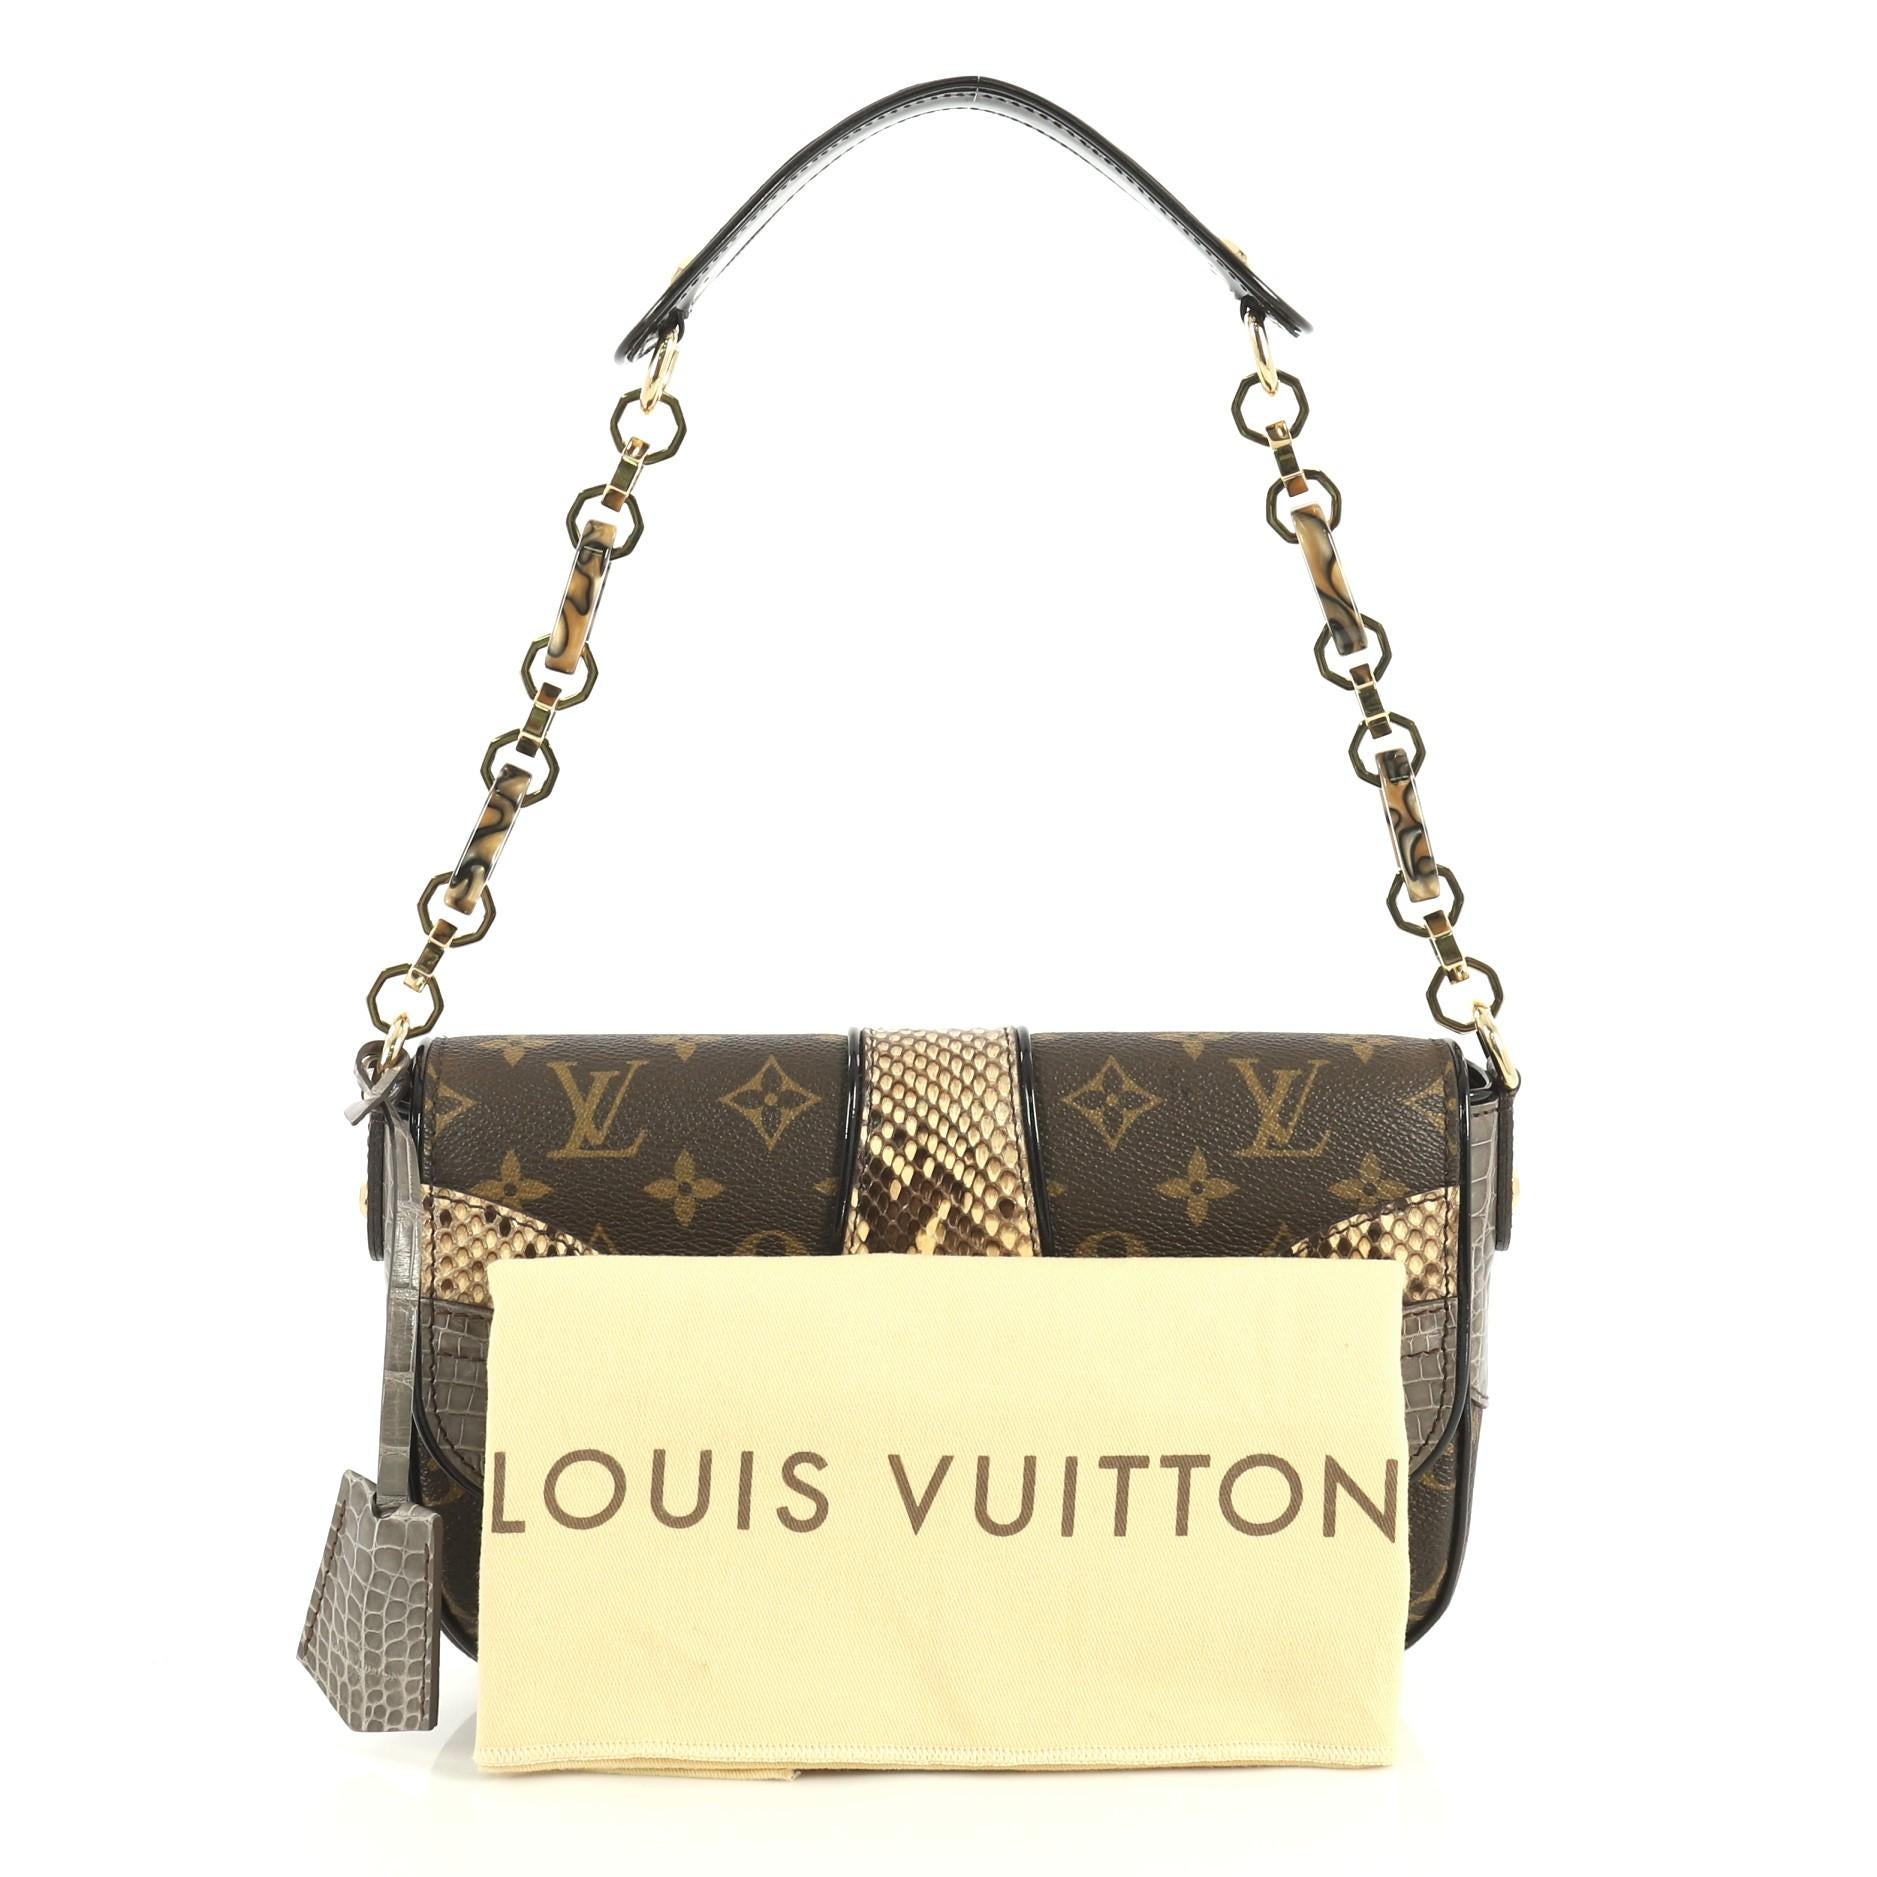 This Louis Vuitton Monogramissime Pochette Monogram Canvas and Exotics, crafted from brown monogram coated canvas with genuine python and alligator skin trim, features resin and chain link strap with shoulder pad and gold-tone hardware. Its